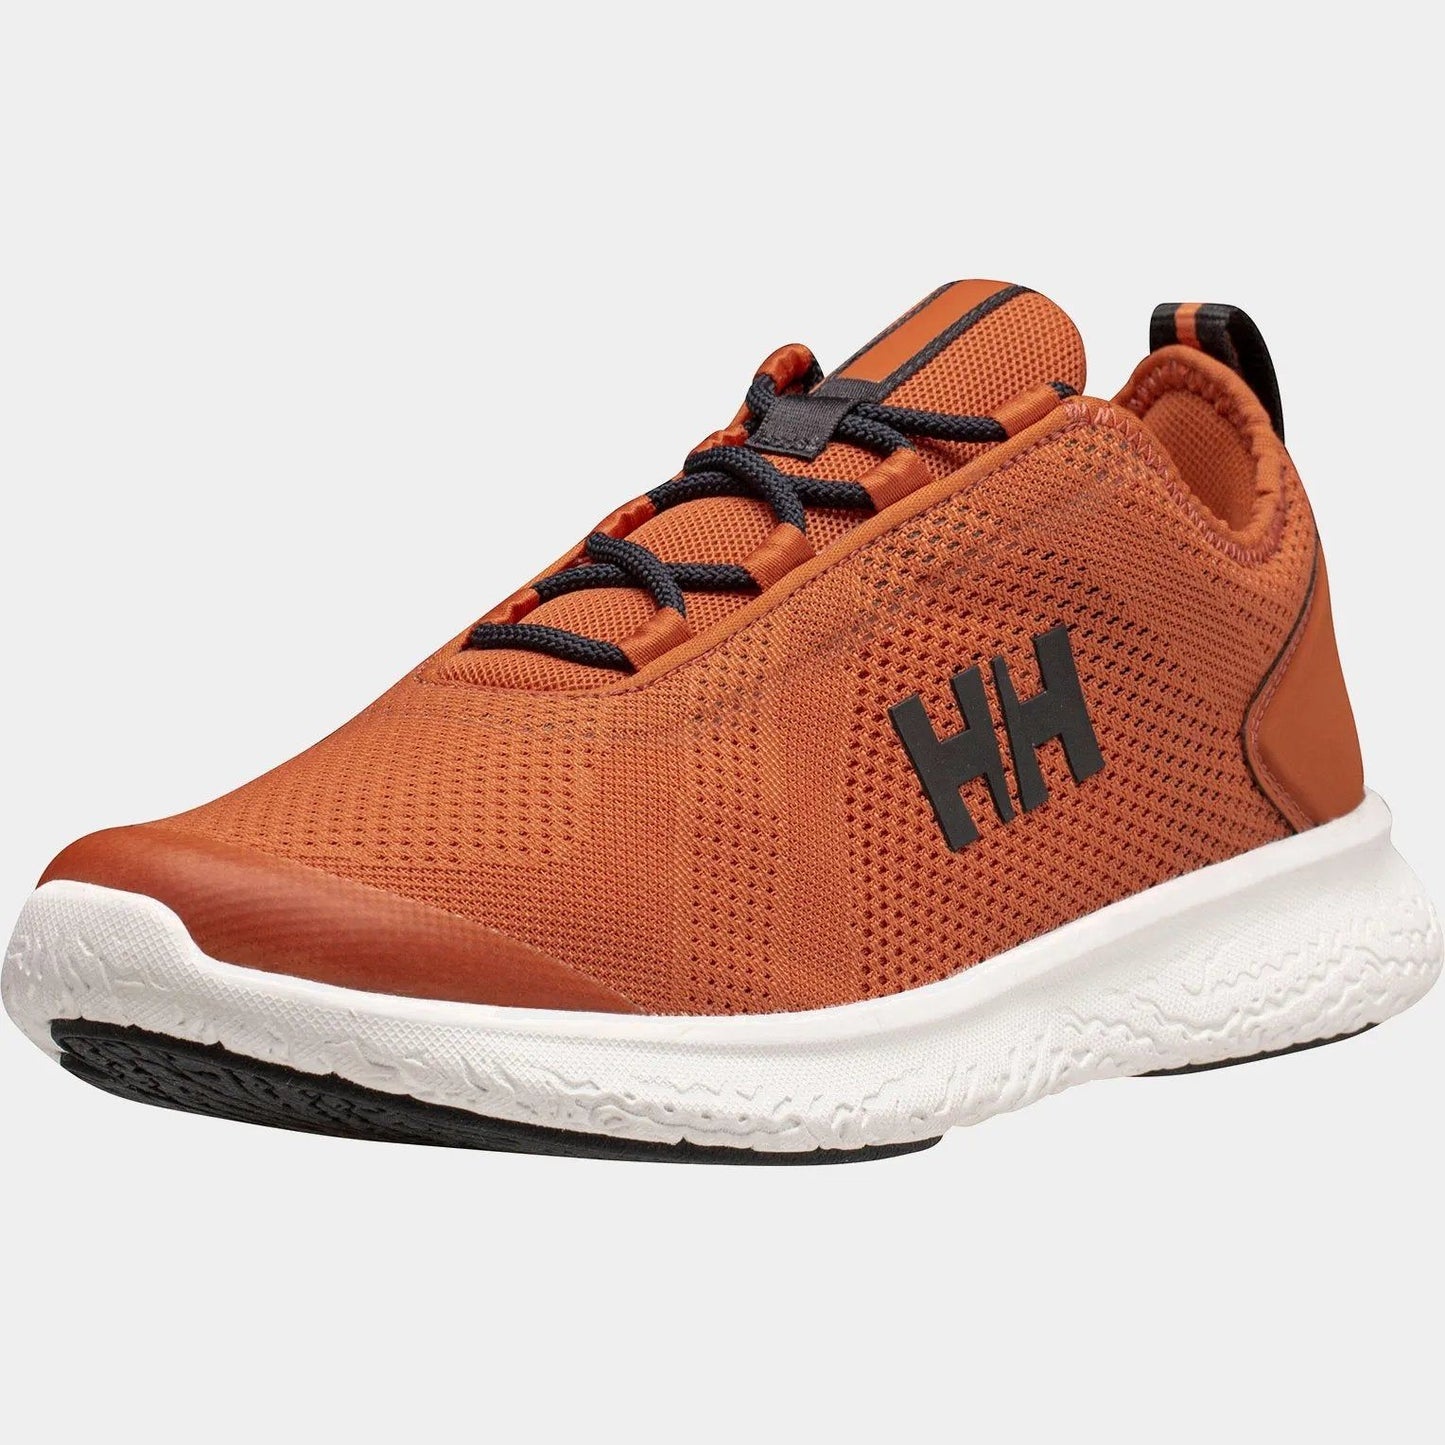 Helly Hansen Men's Supalight Medley Shoes Flame White